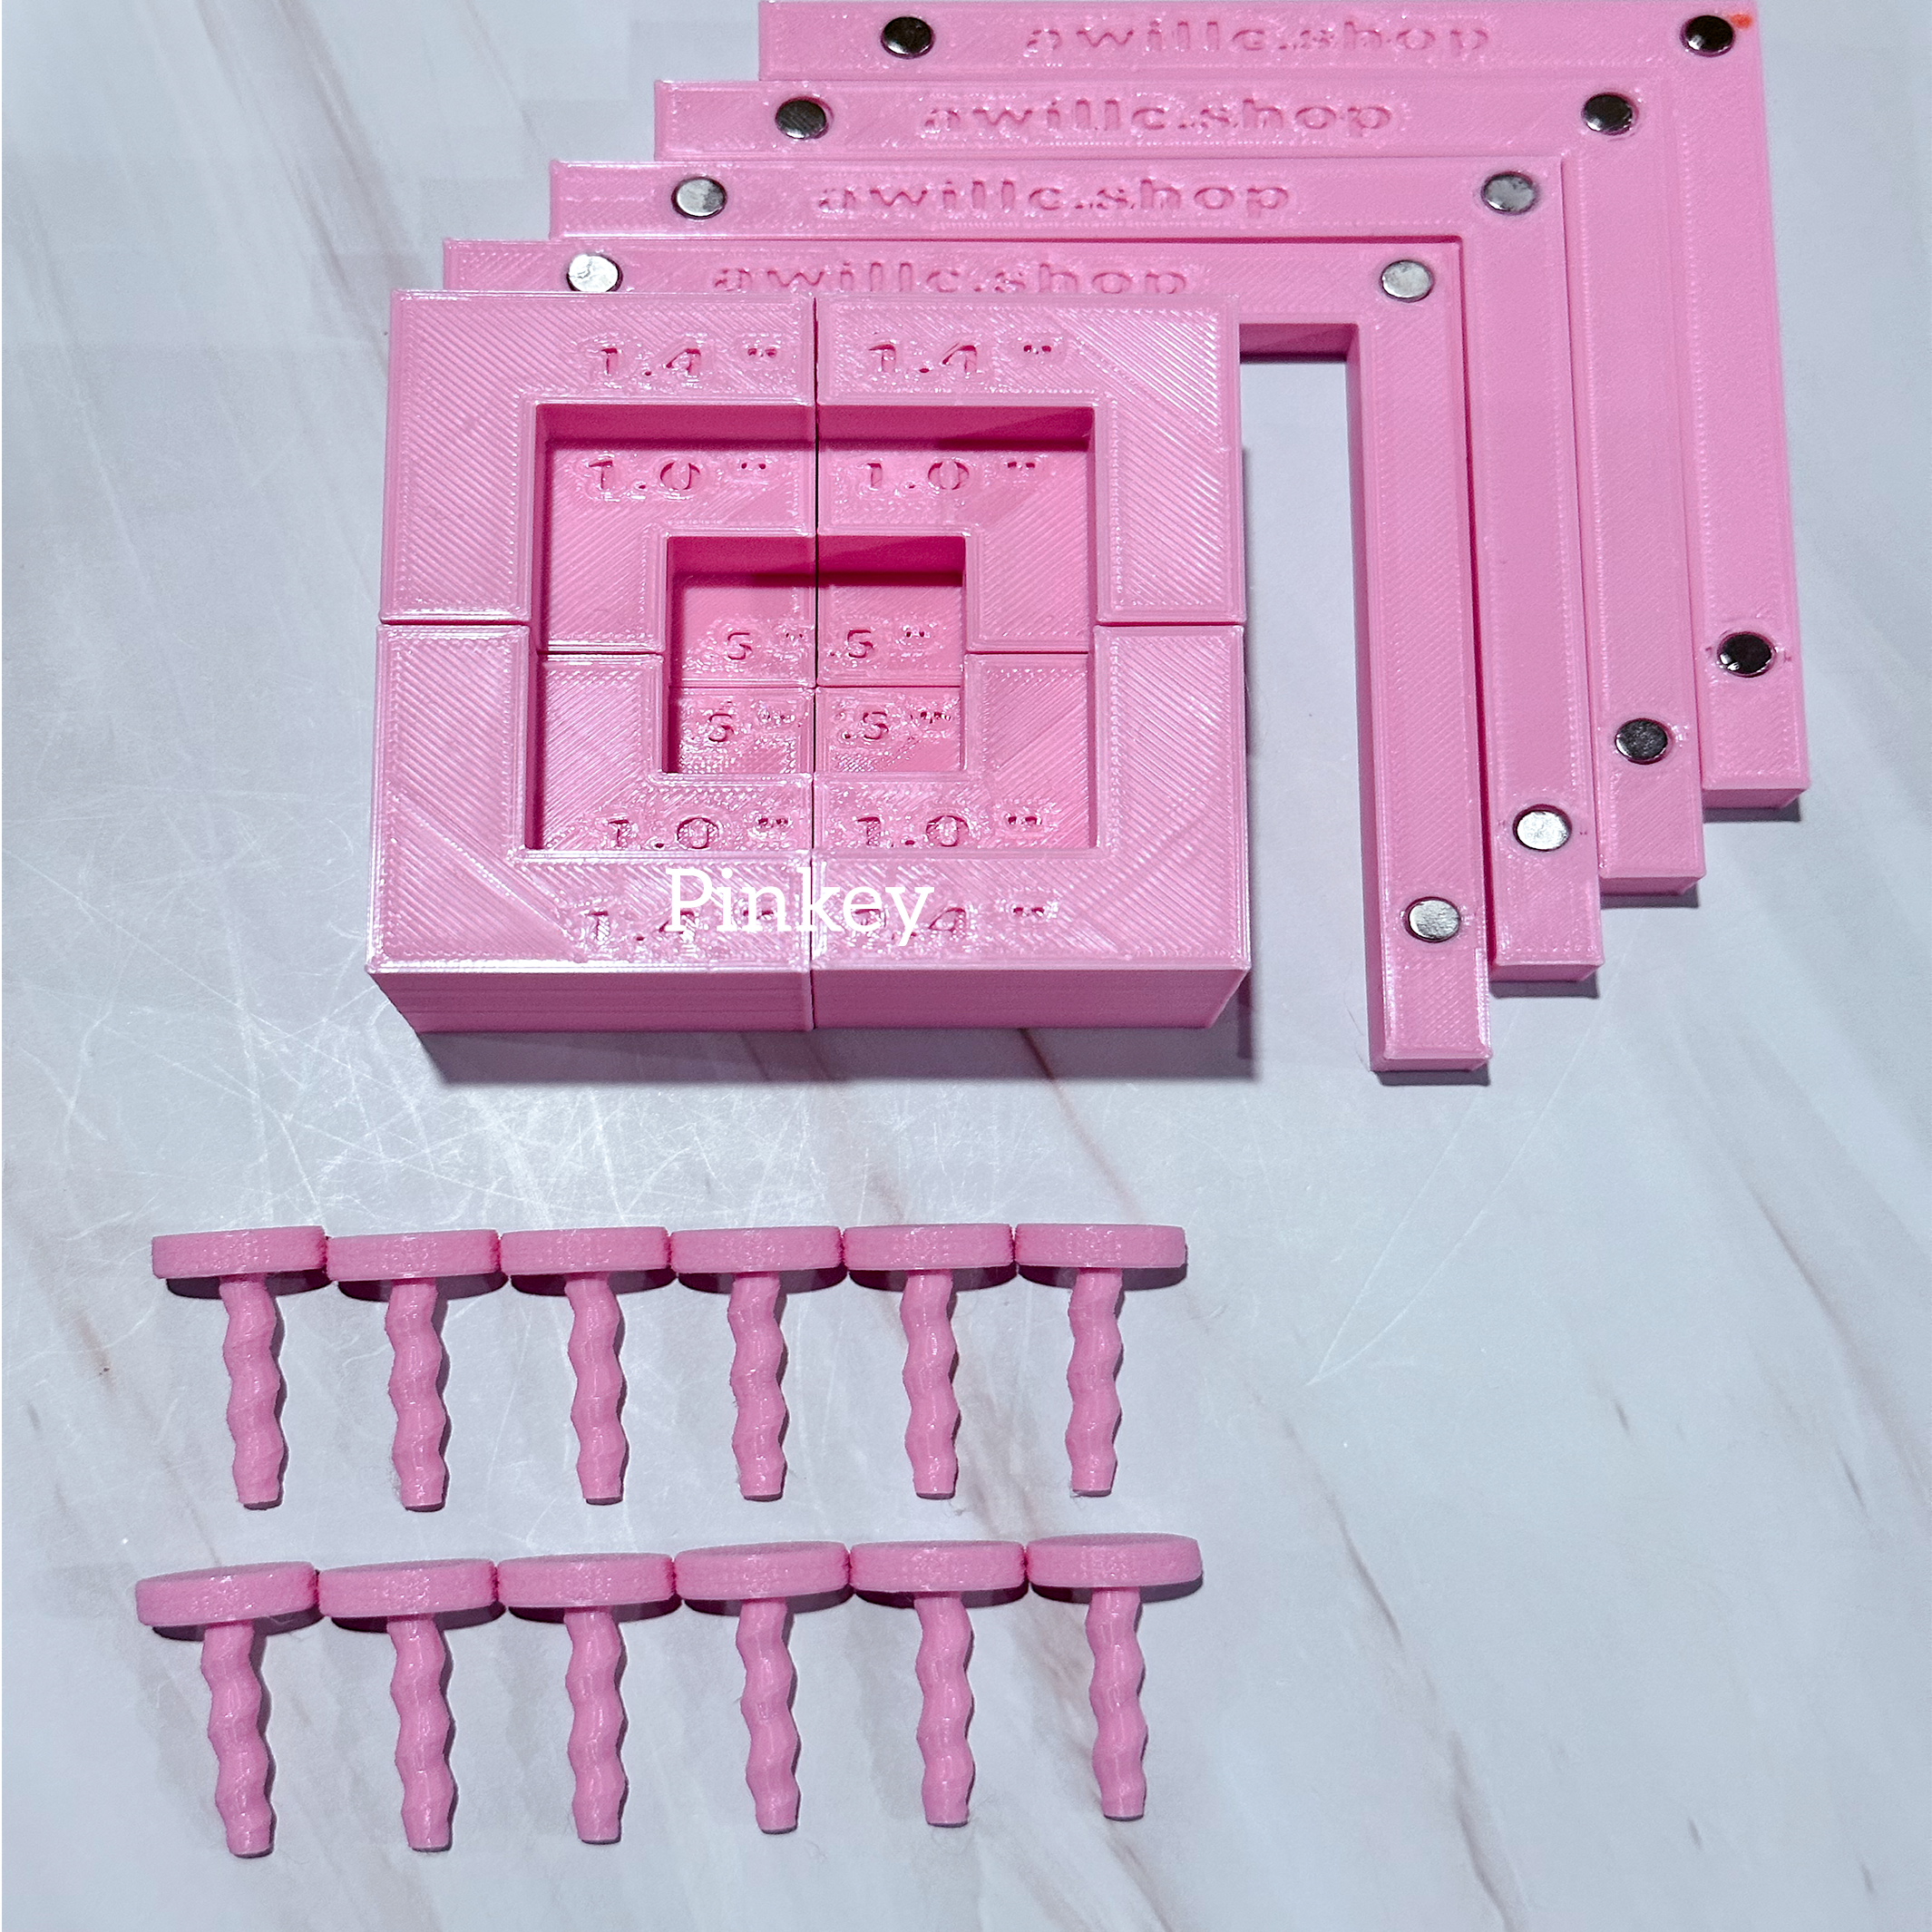 3D Laser Bed Kits Pinky -awillc.shop